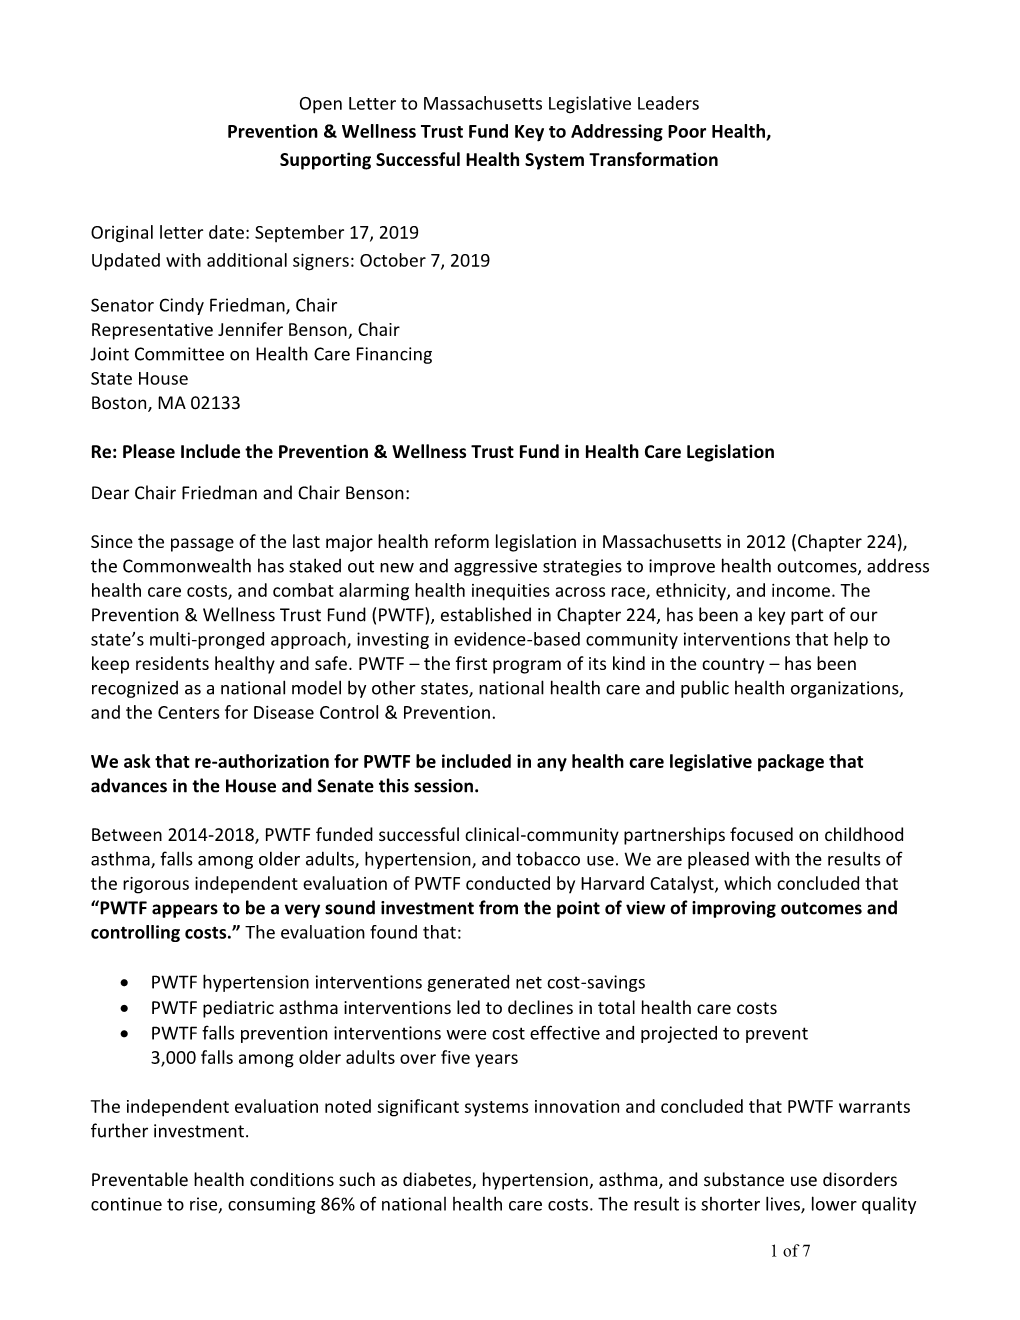 2019 Open Letter to Legislative Leaders Supporting PWTF